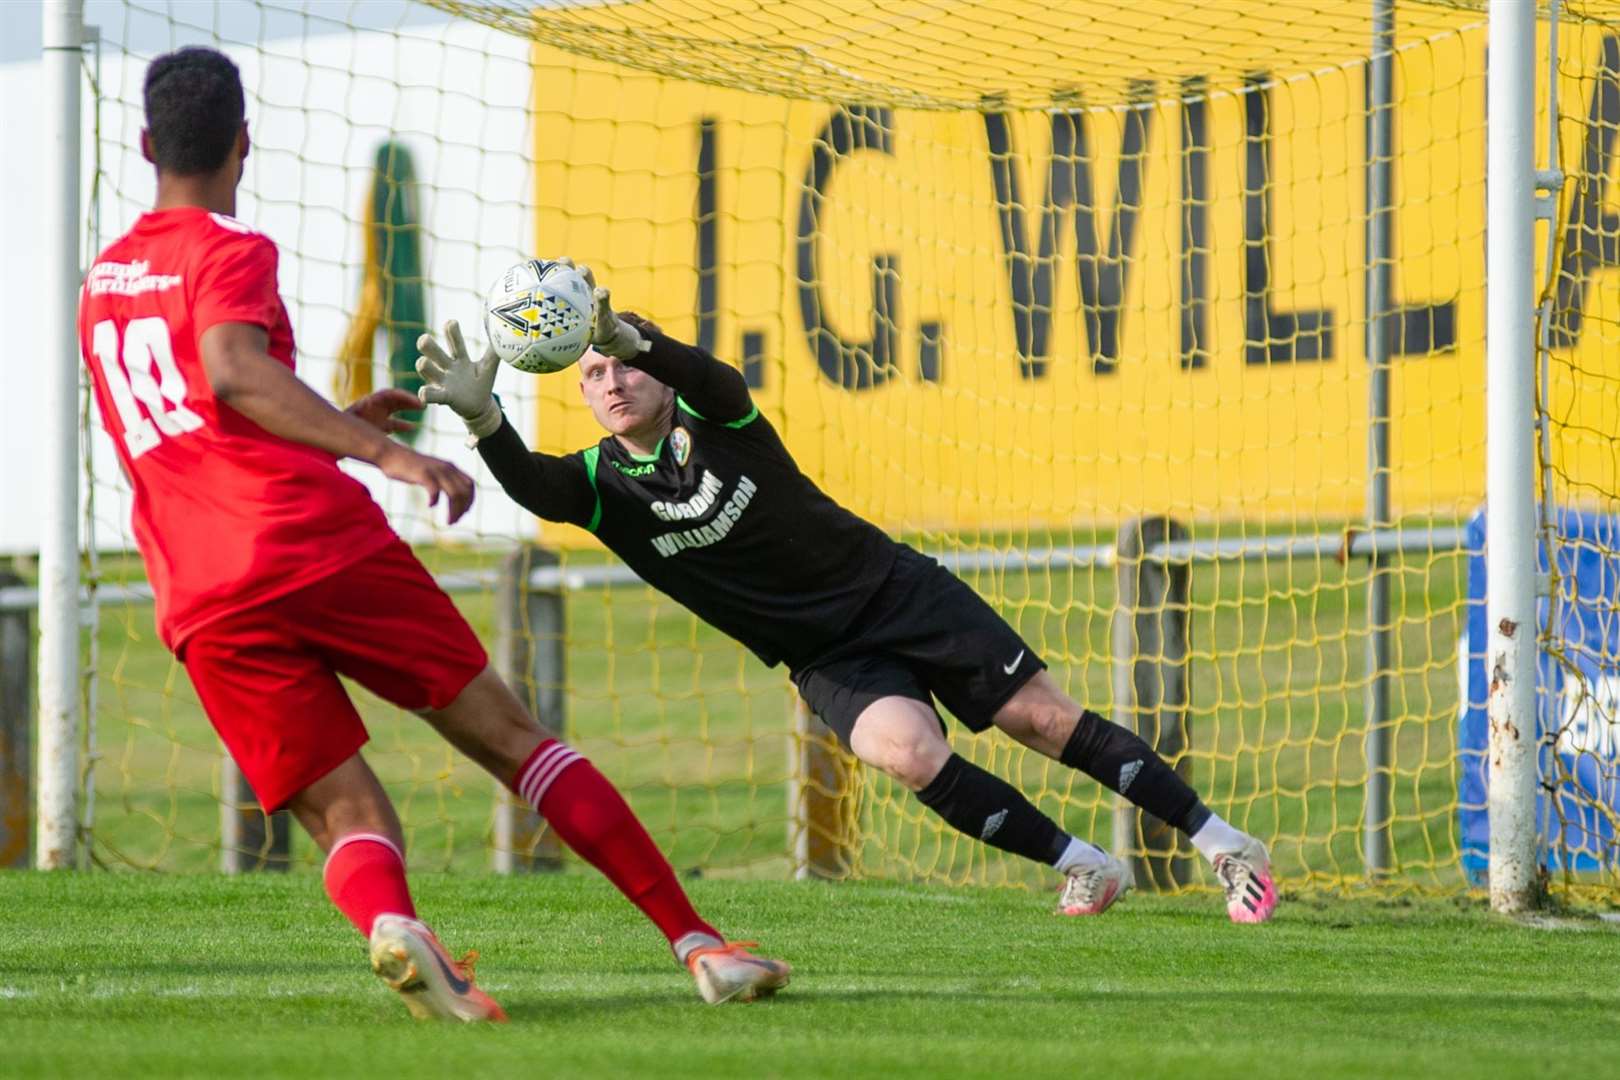 Forres keeper Paul Robertson saves this Lossie effort...Forres Mechanics FC (1) vs Lossiemouth FC (0) - Highland Football League - Mosset Park, Forres 28/08/2021...Picture: Daniel Forsyth..